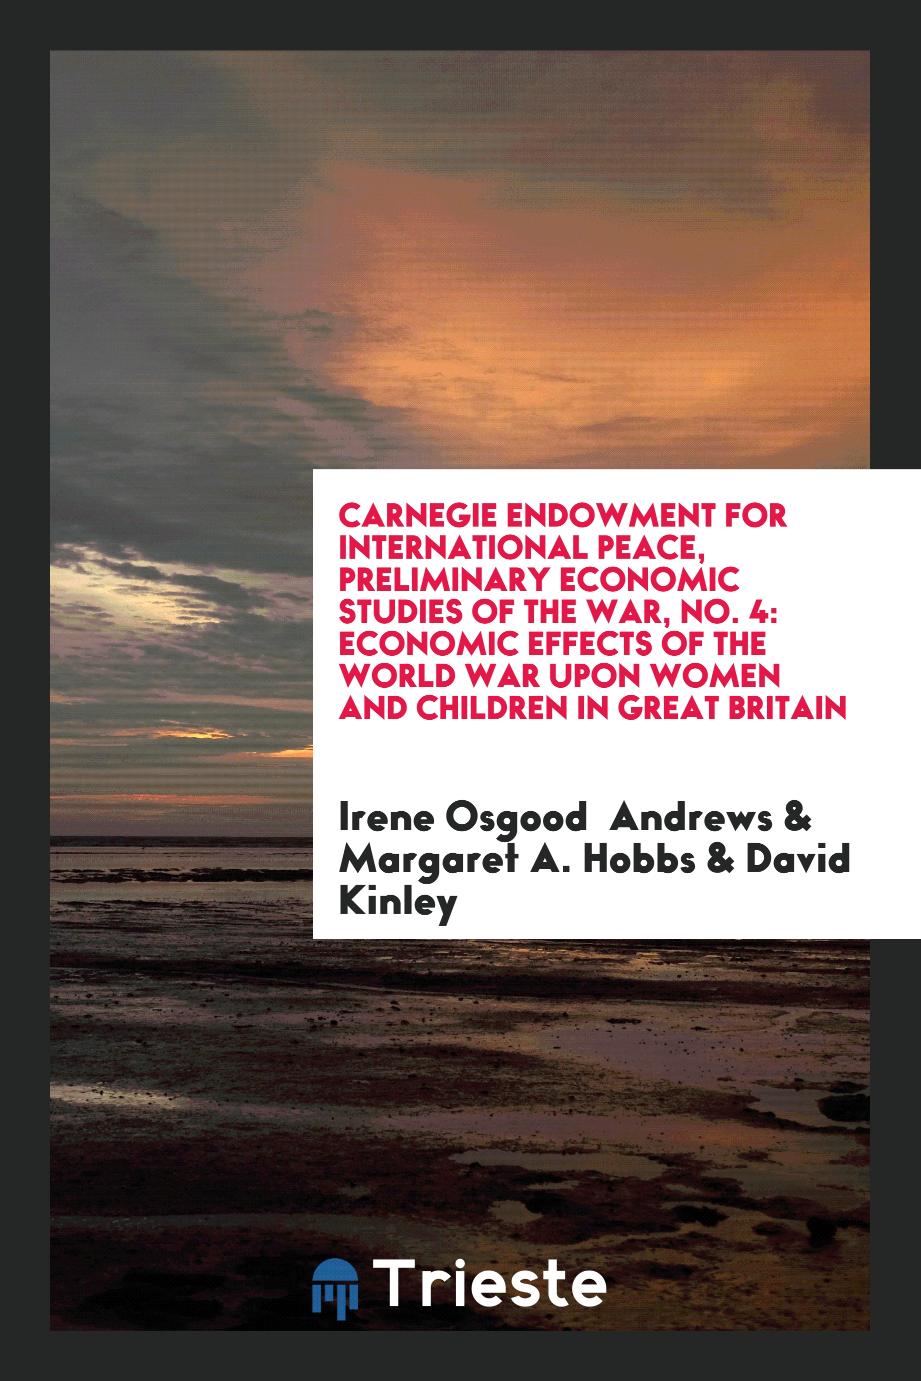 Carnegie Endowment for International Peace, Preliminary Economic Studies of the War, No. 4: Economic Effects of the World War upon Women and Children in Great Britain